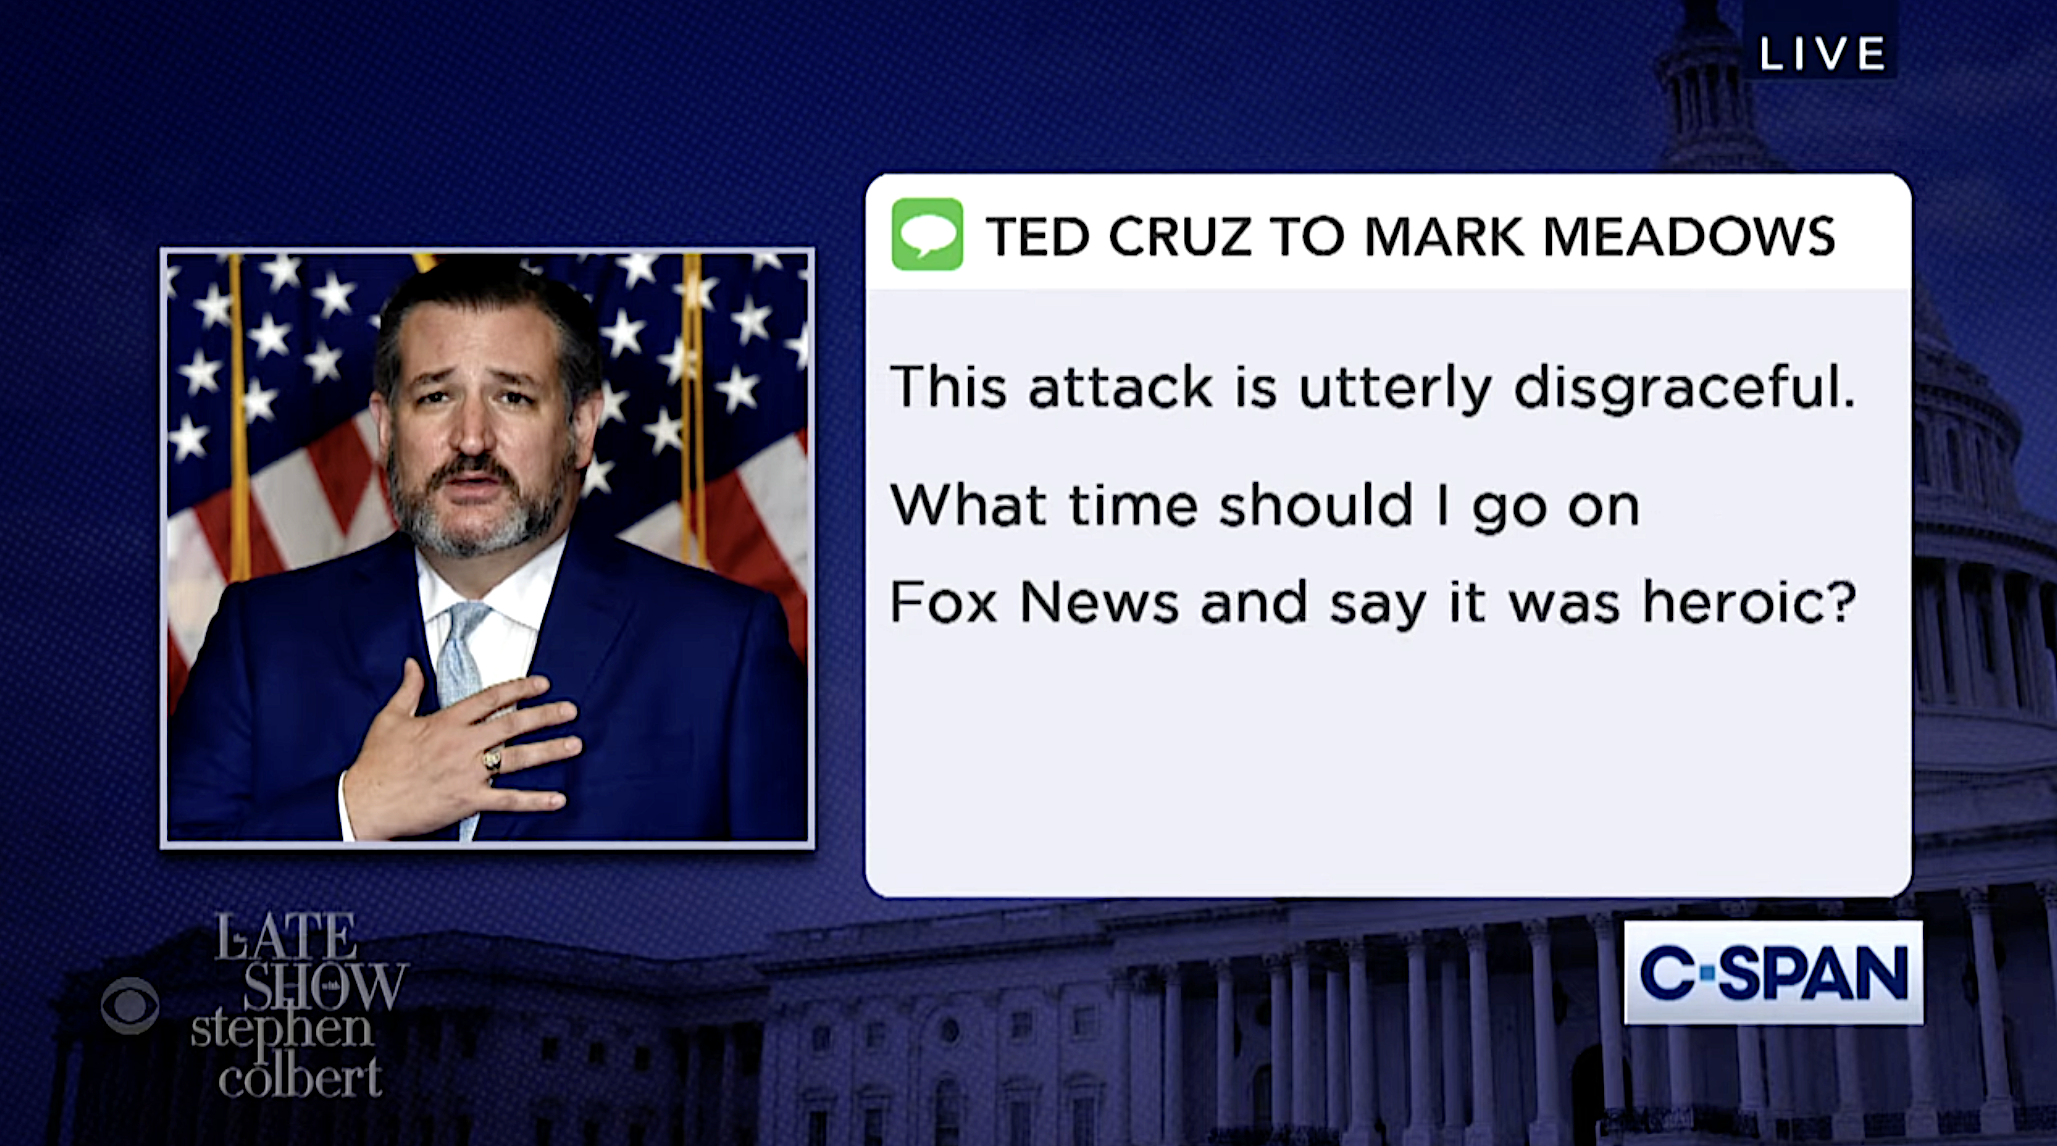 Fake text from Ted Cruz